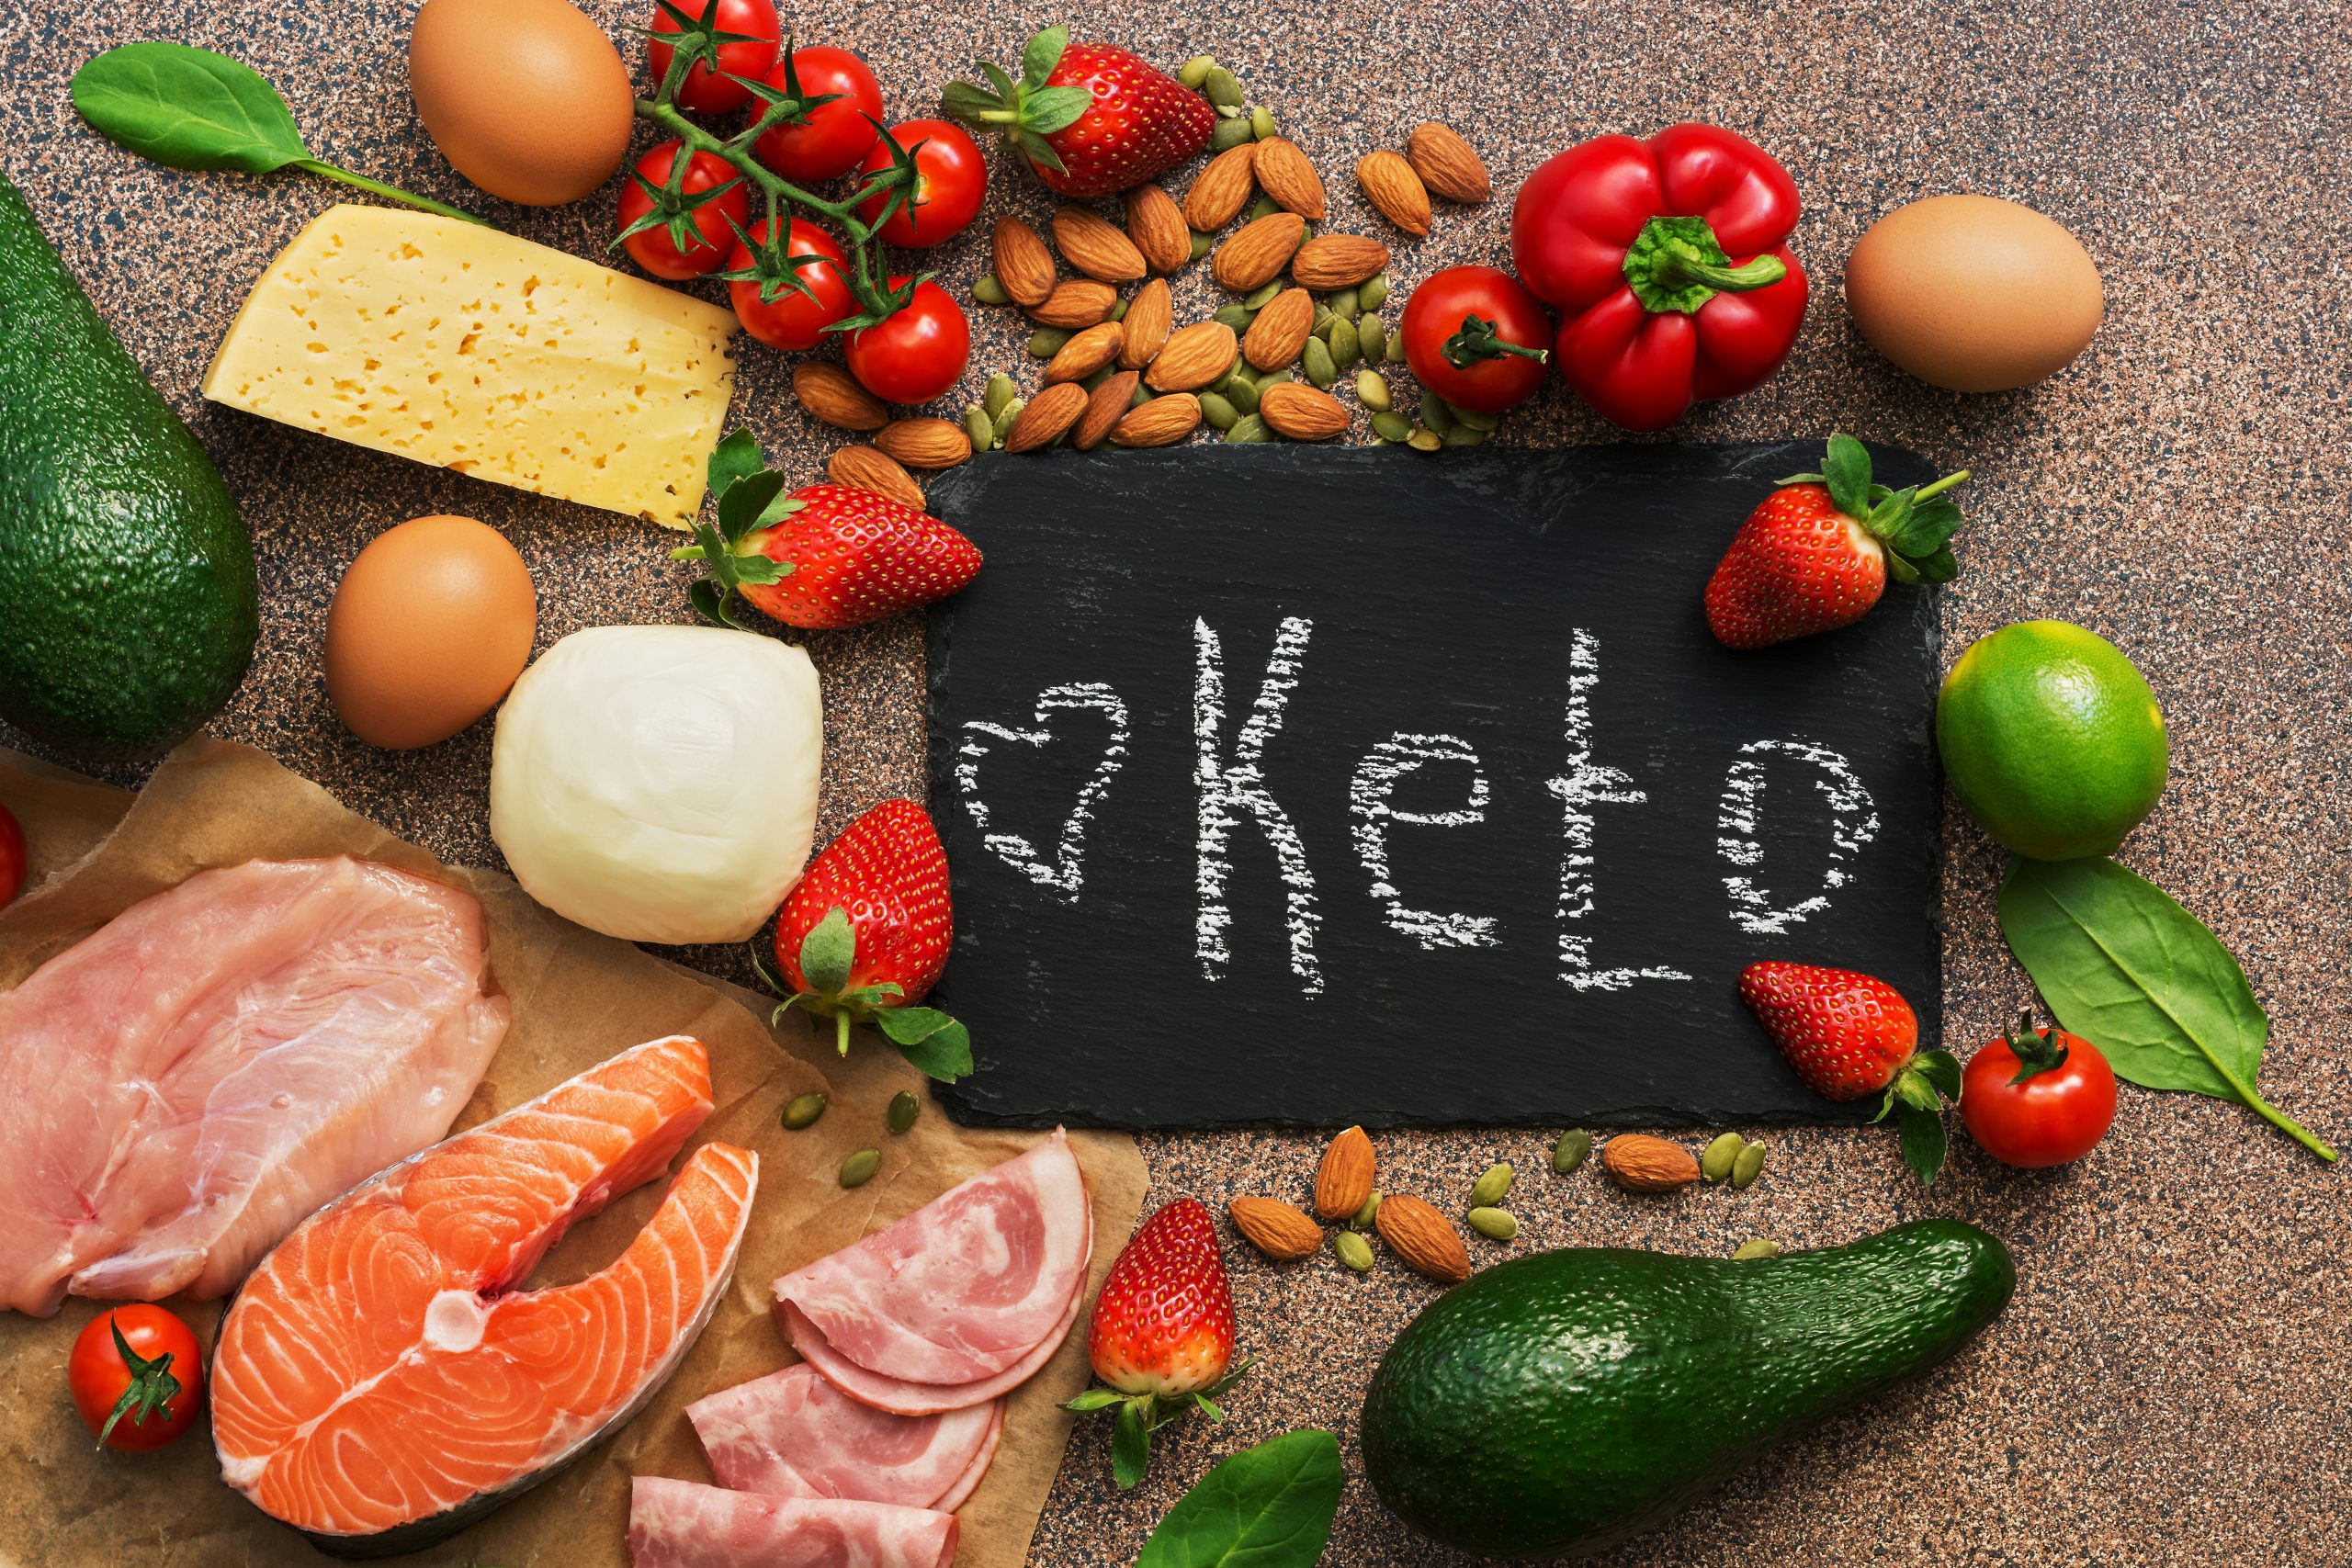 Keto diet food. Healthy low carbs products.Keto diet concept. Vegetables, fish, meat, nuts, seeds, strawberries, cheese on a brown background. Top view. Signboard.